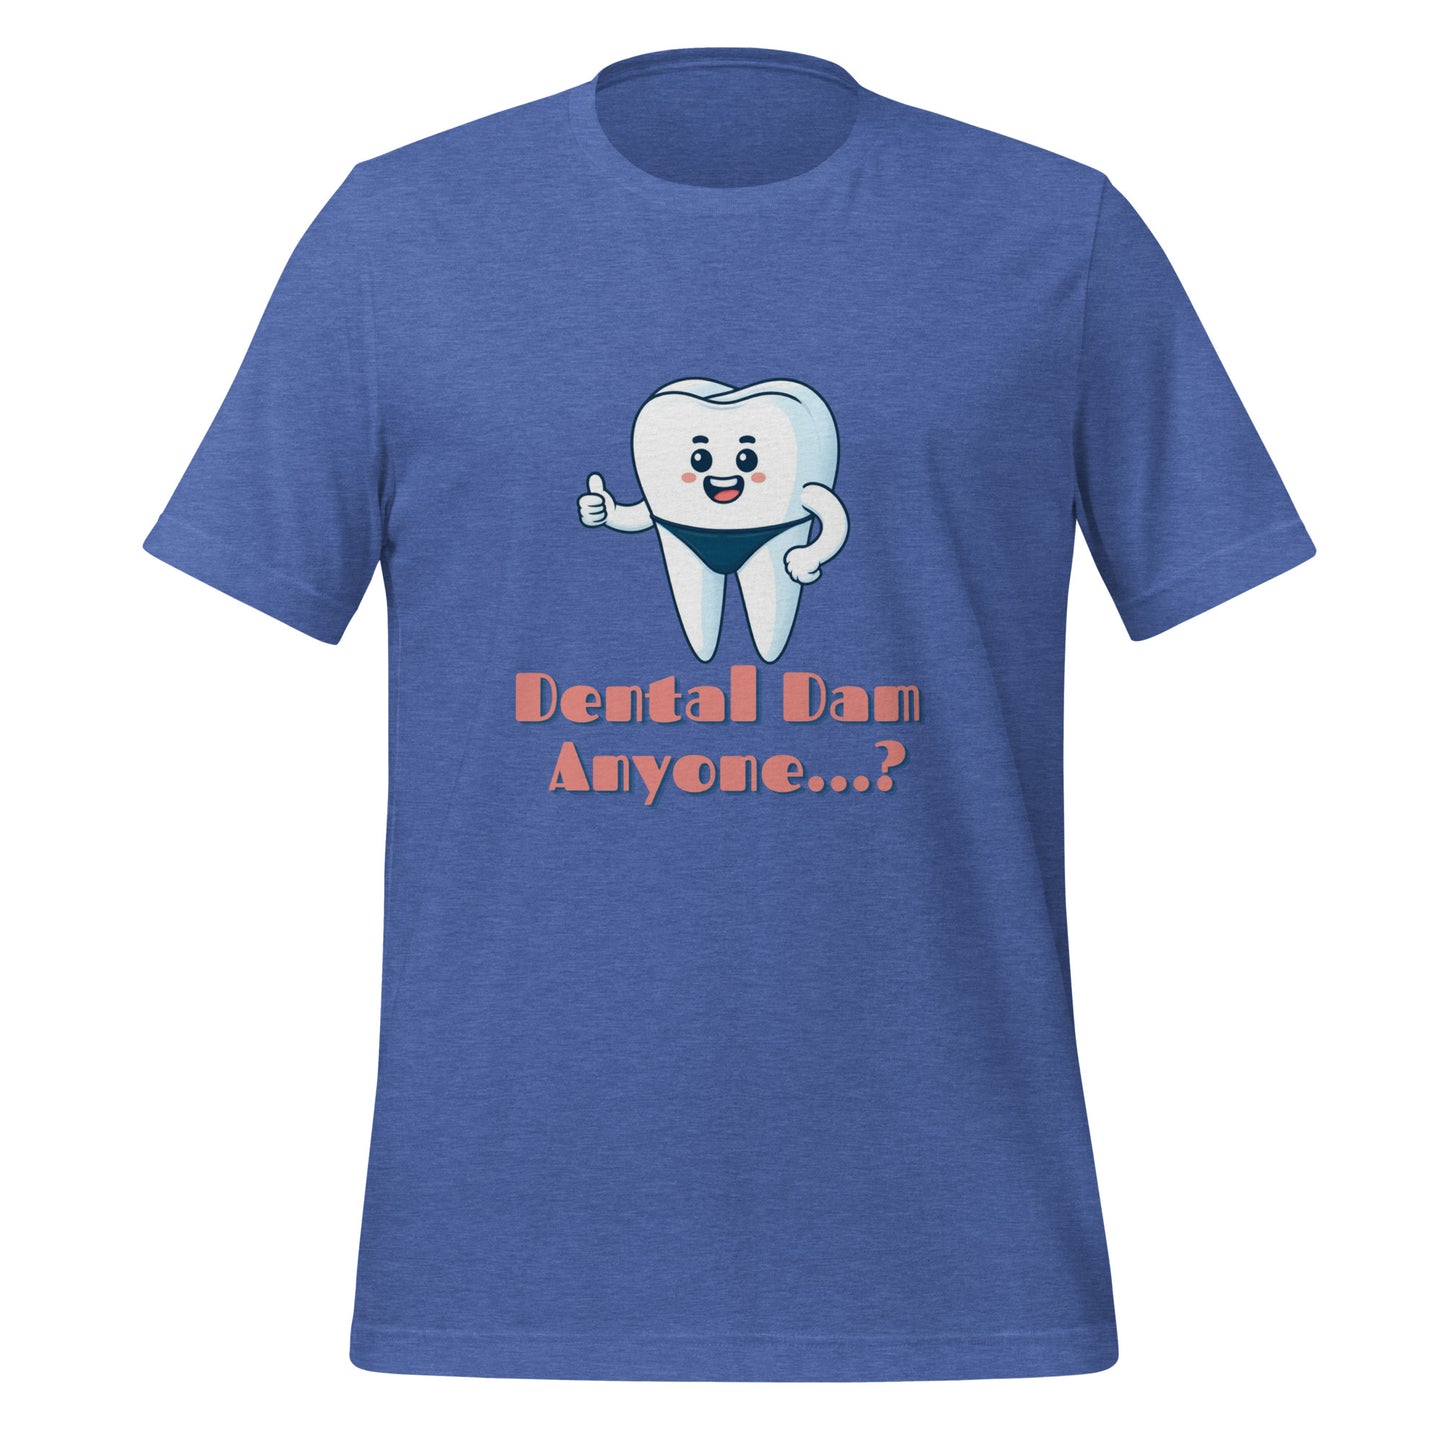 Funny dental shirt featuring a playful tooth character in a speedo with the text ‘Dental Dam Anyone?’, perfect for dentists, dental hygienists, and dental students who enjoy dental humor. This dental shirt is a unique addition to any dental professional’s wardrobe, making it an ideal dental office shirt. Don’t miss out on our dental assistant shirts and dental hygiene shirts. Heather true royal color.